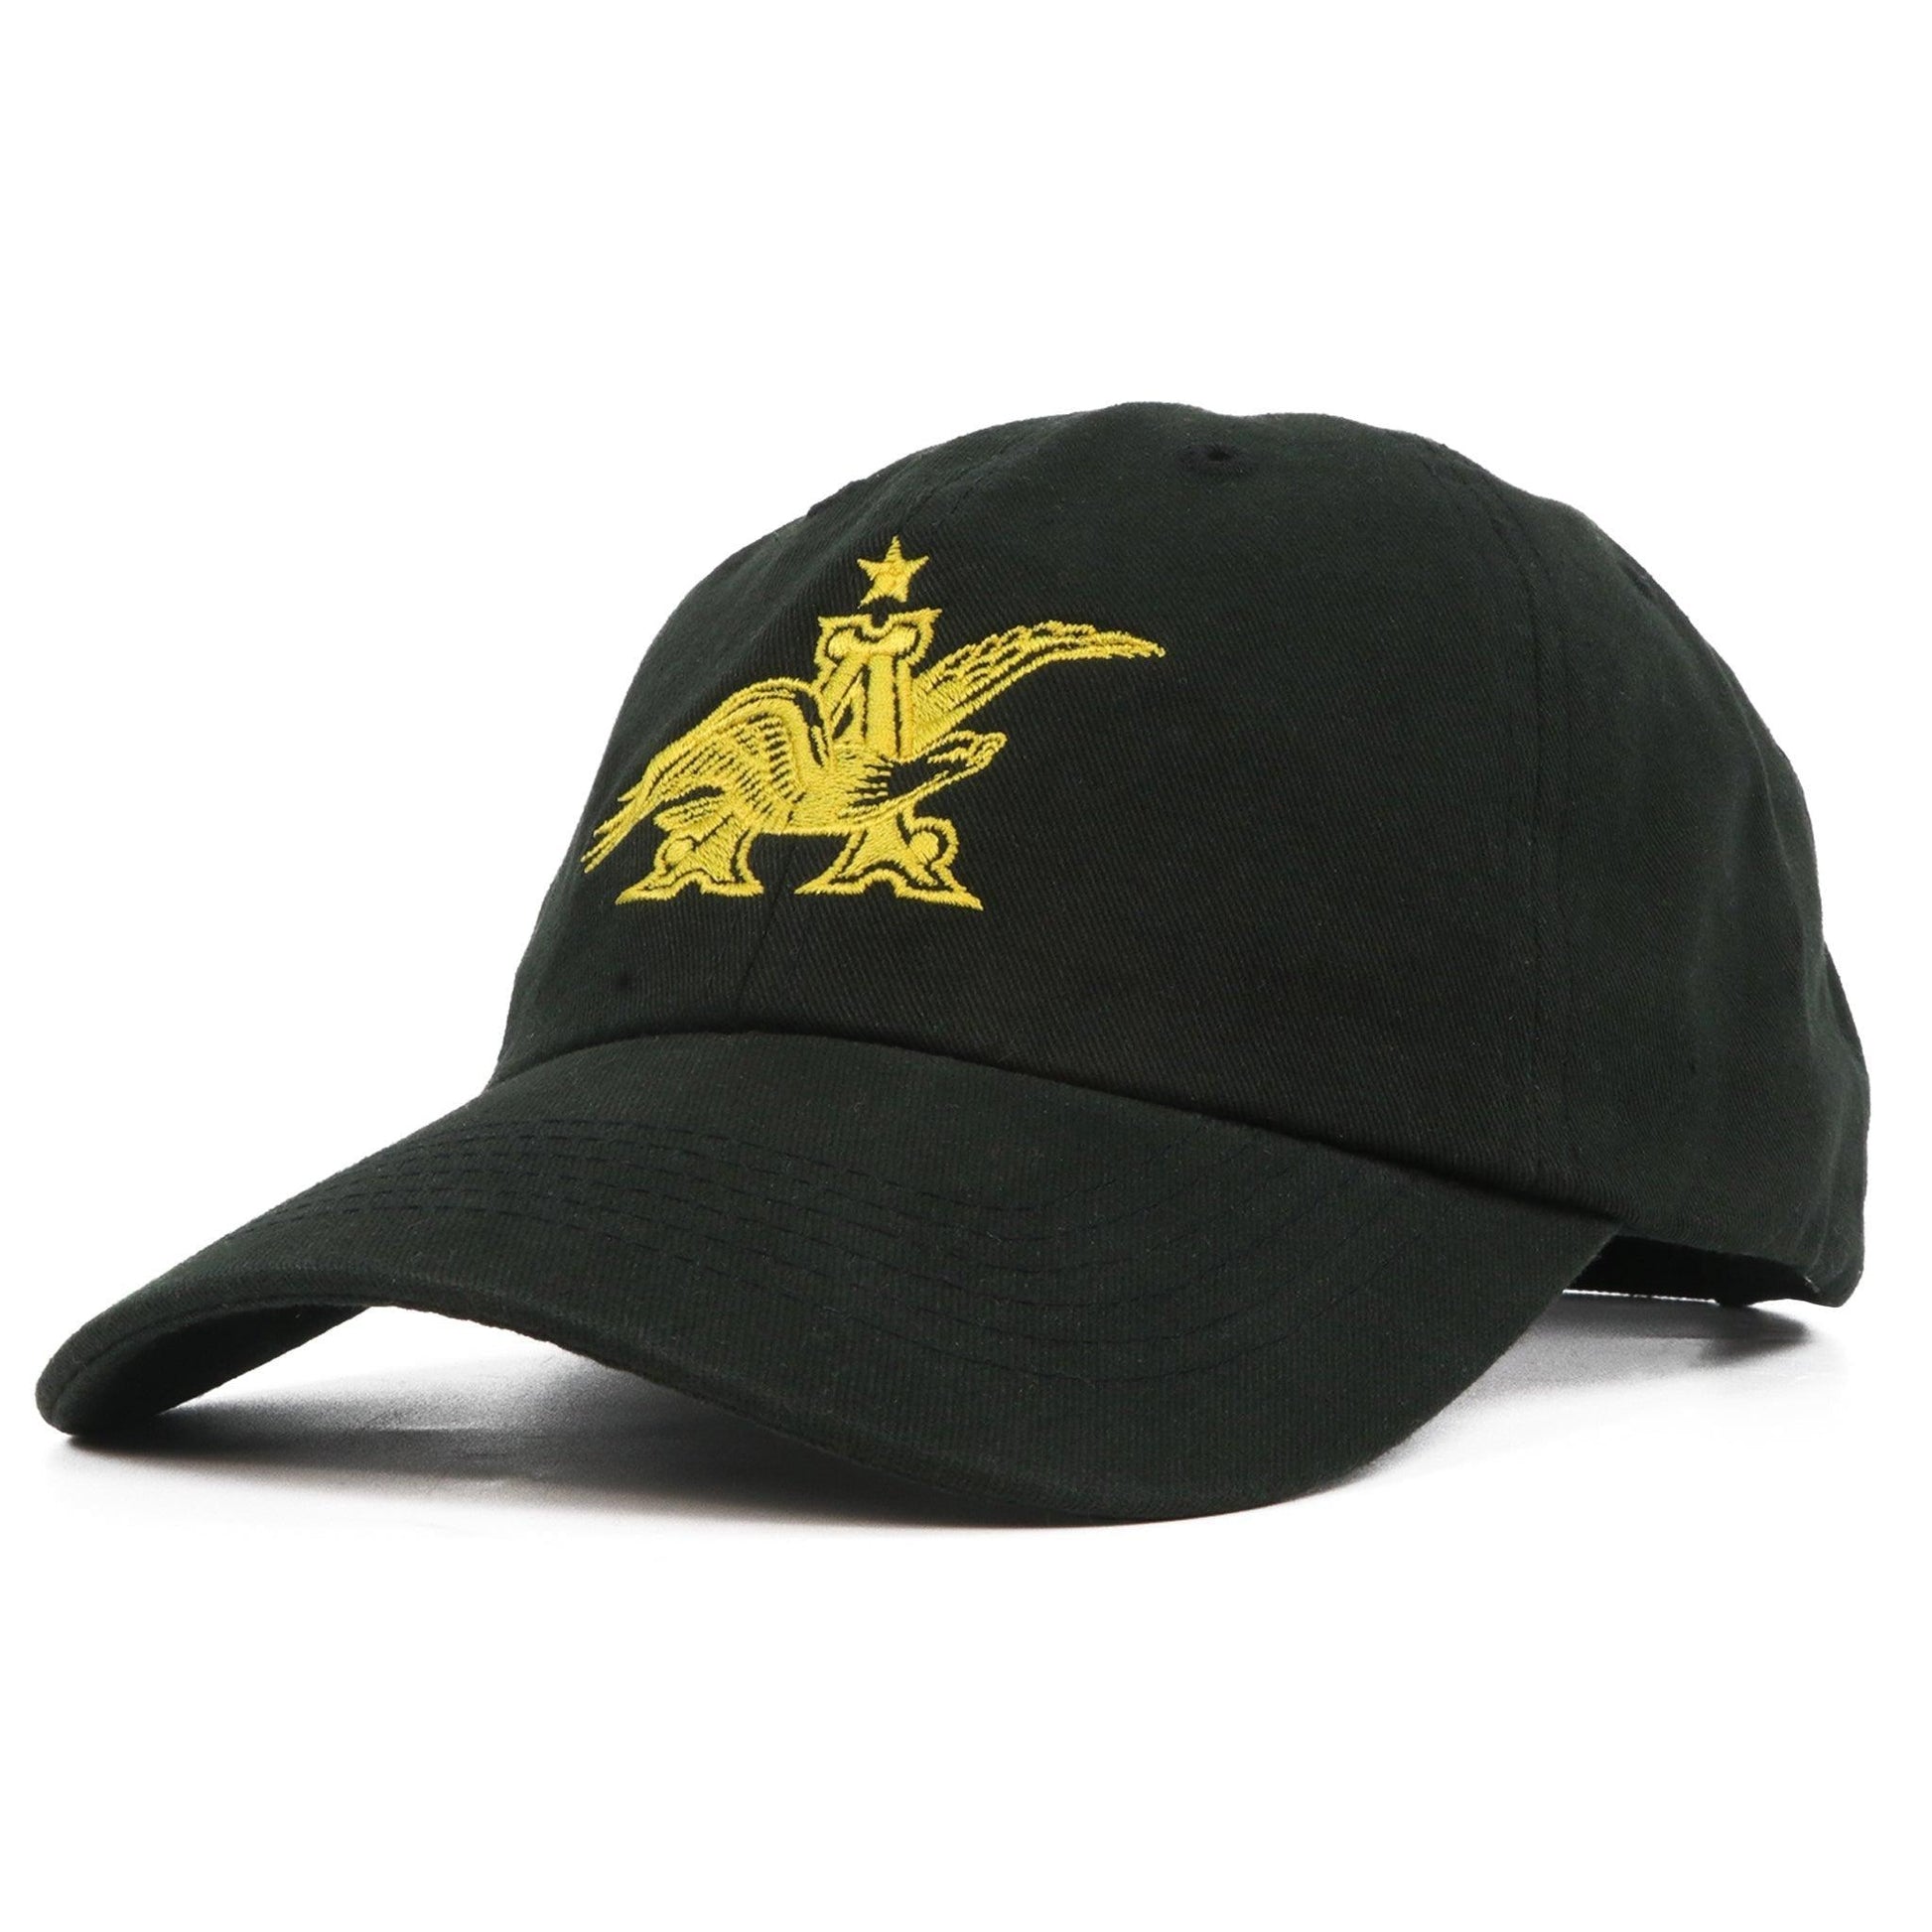 black and gold a and eagle hat